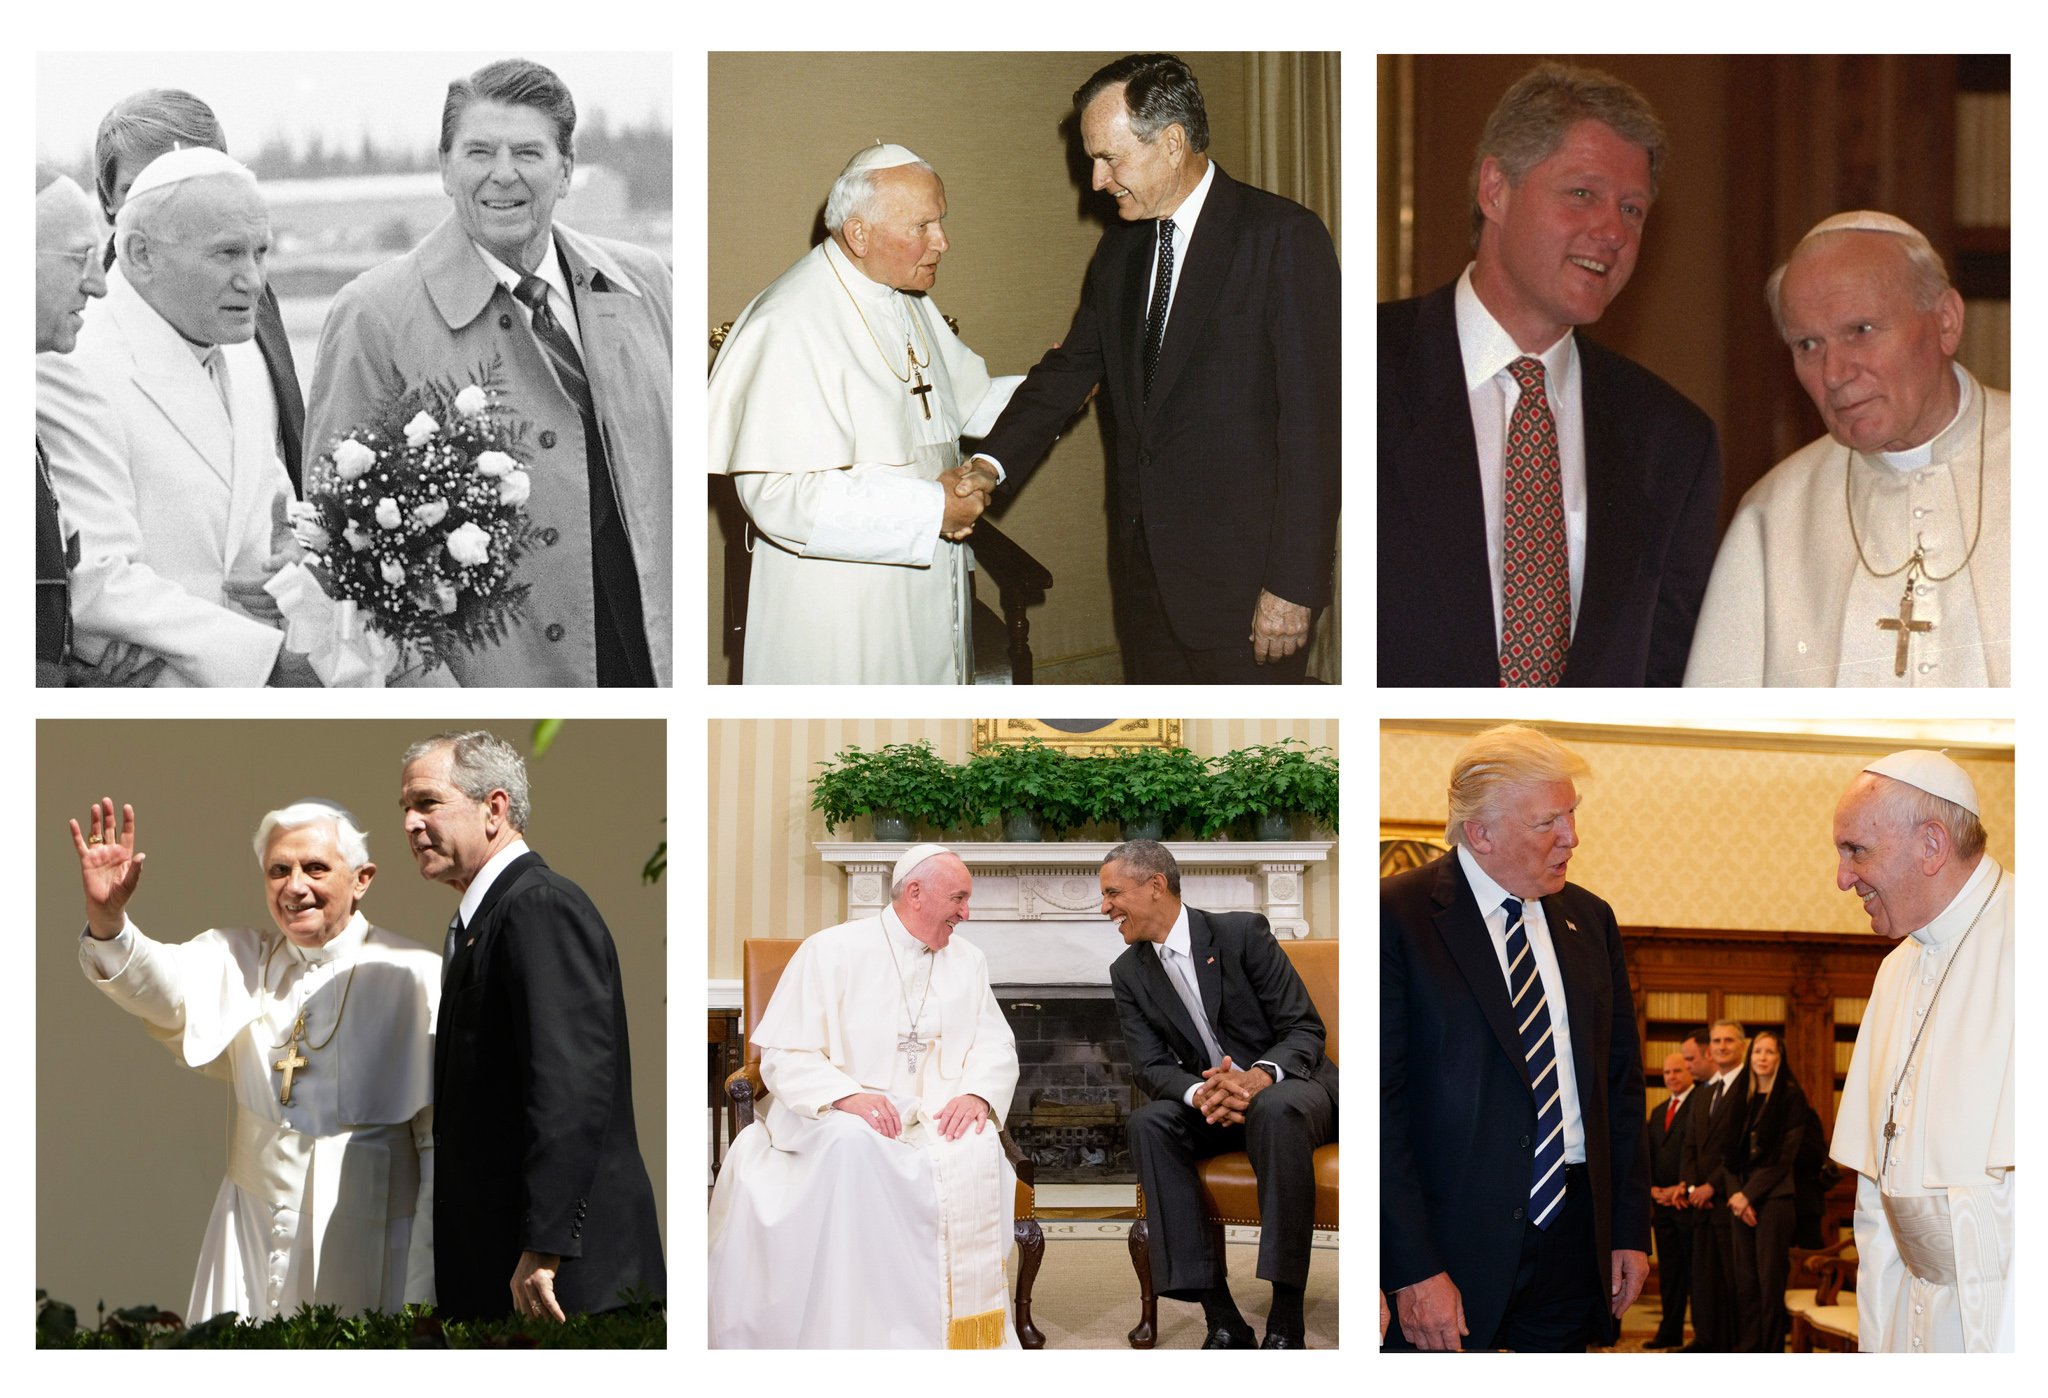 Top row: President Ronald Reagan with Pope John Paul II; President George H.W. Bush with Pope John Paul II; President Bill Clinton with Pope John Paul II. Bottom row: President George W. Bush with Pope Benedict; President Barack Obama with Pope Francis; President Donald Trump with Pope Francis (All images © AP Images)